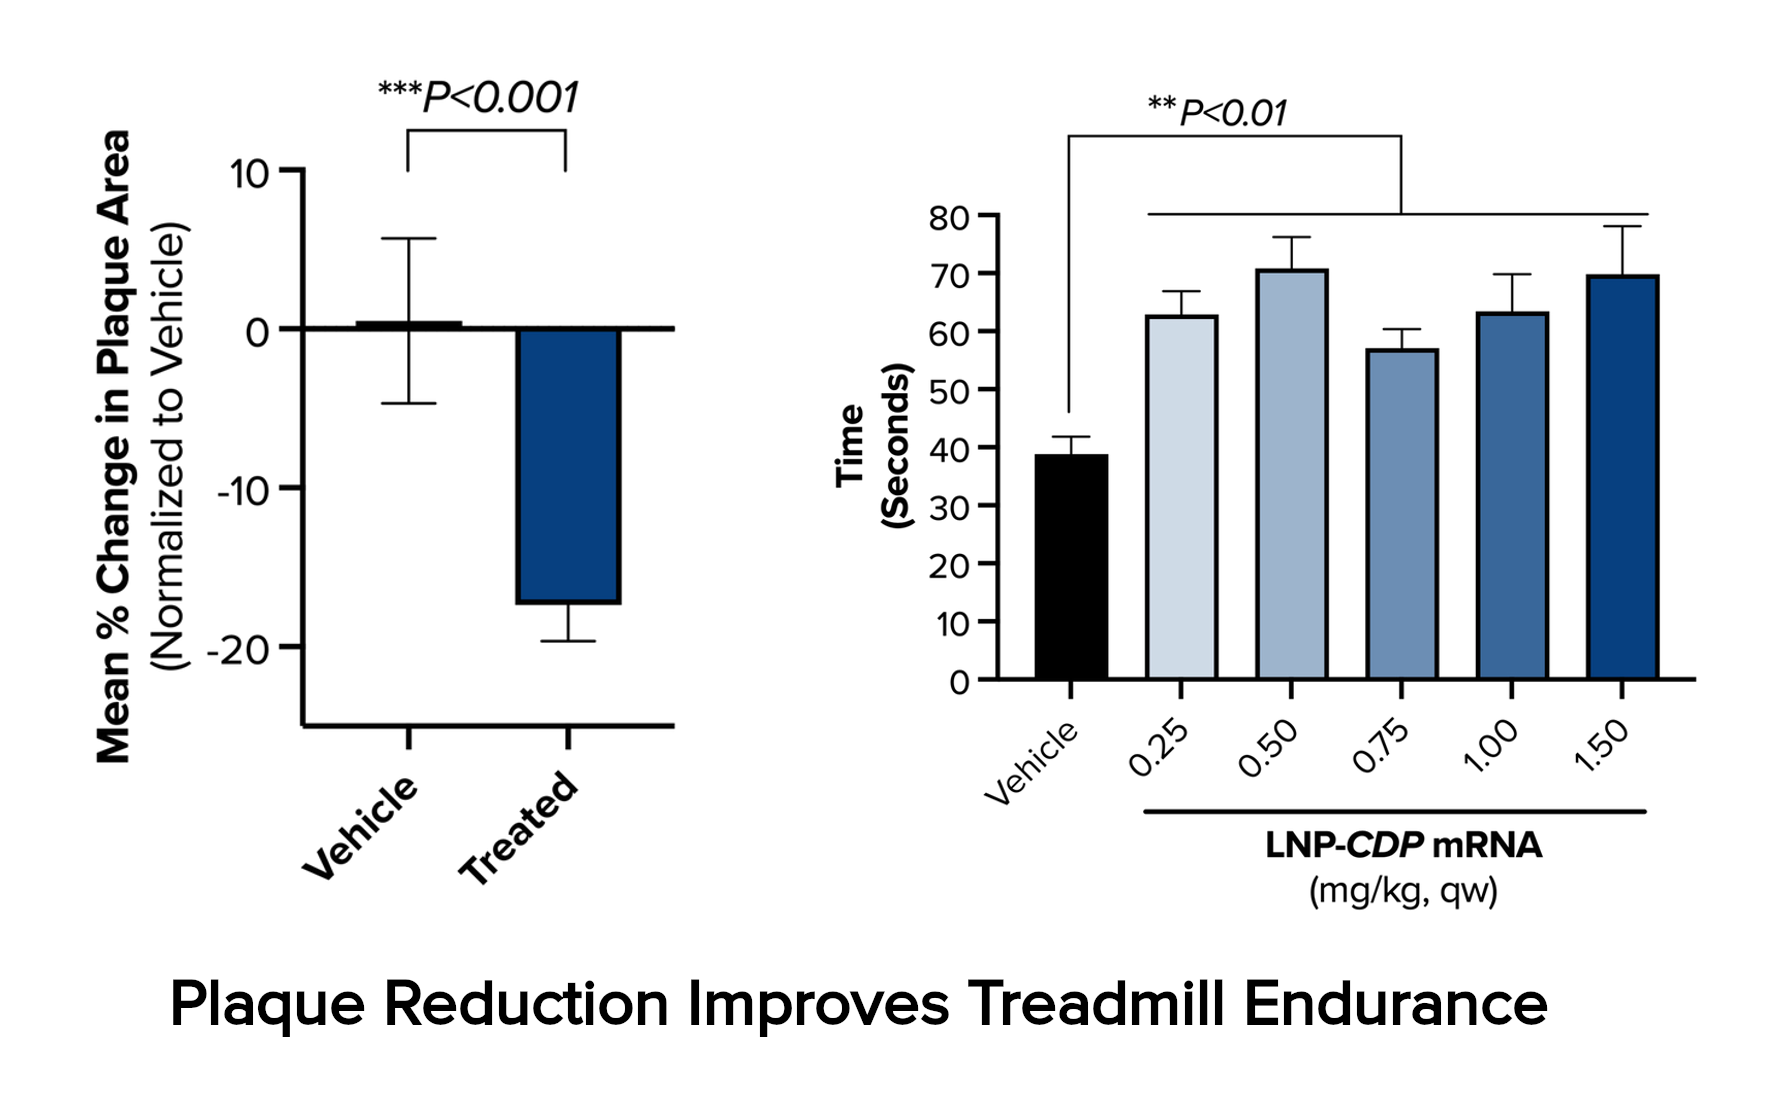 LDLR-null mice exhibit reduced plaque and improved treadmill performance